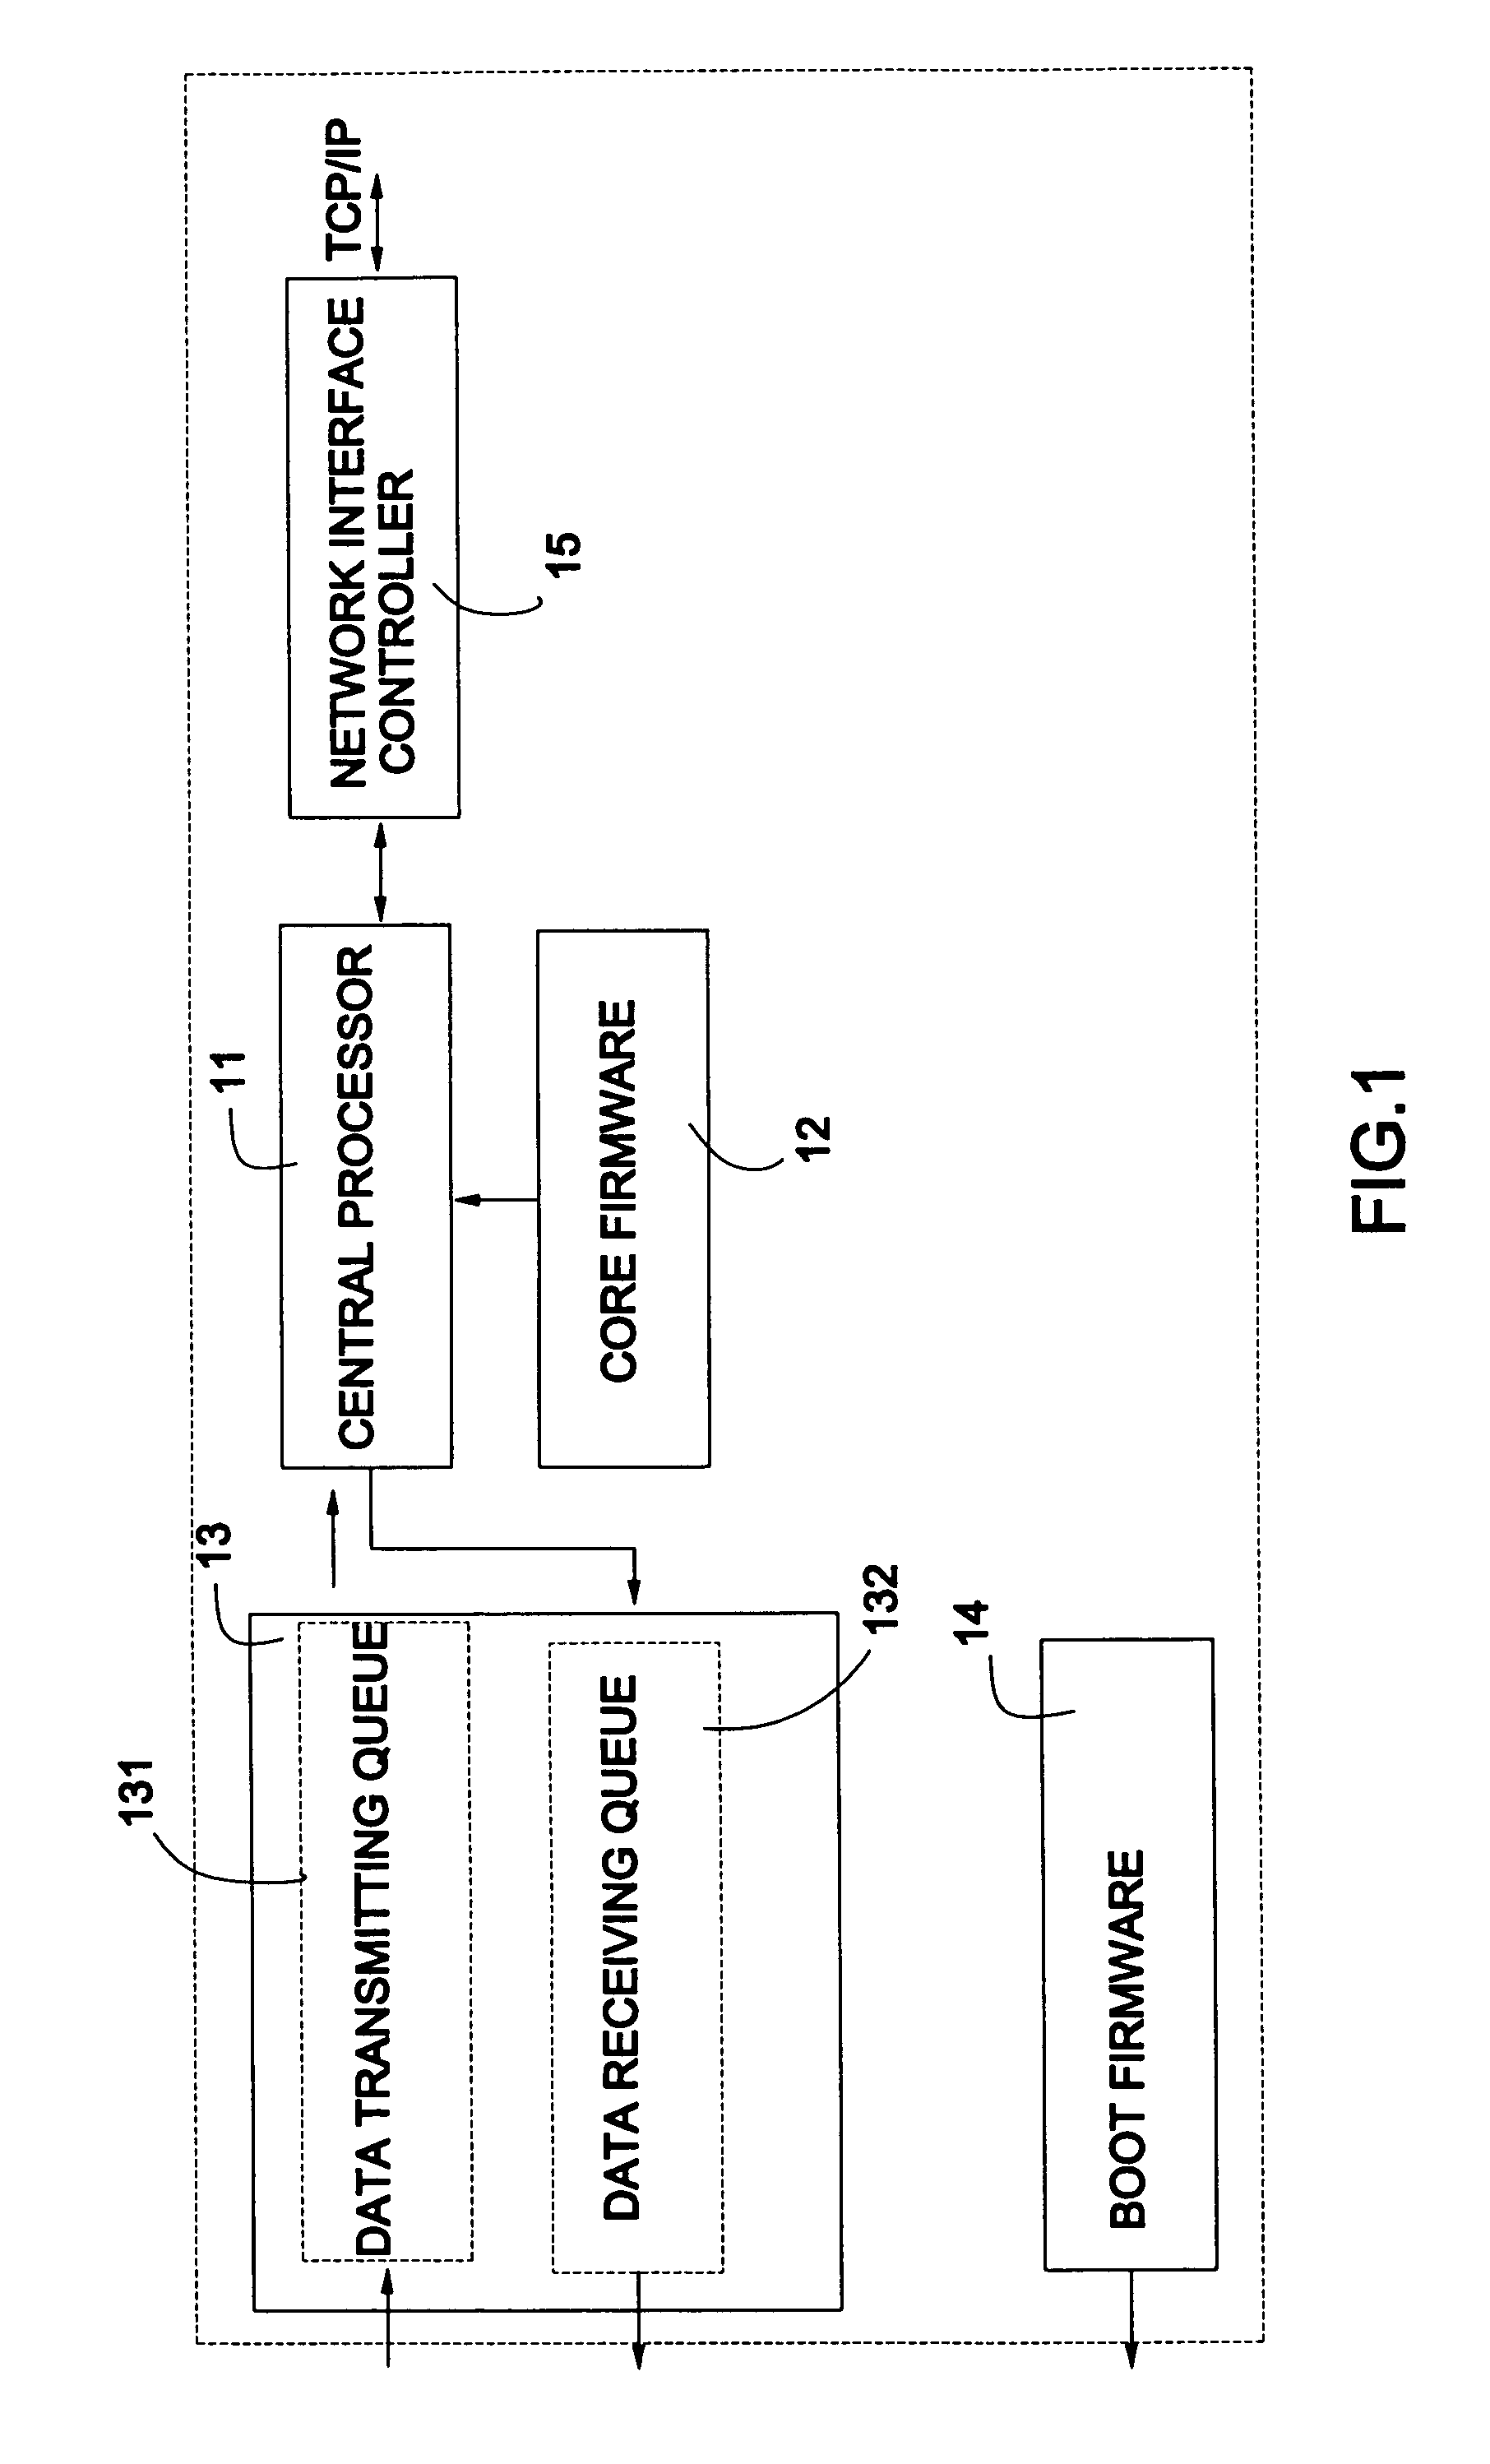 Method and apparatus for redirecting a local boot request to a remote location